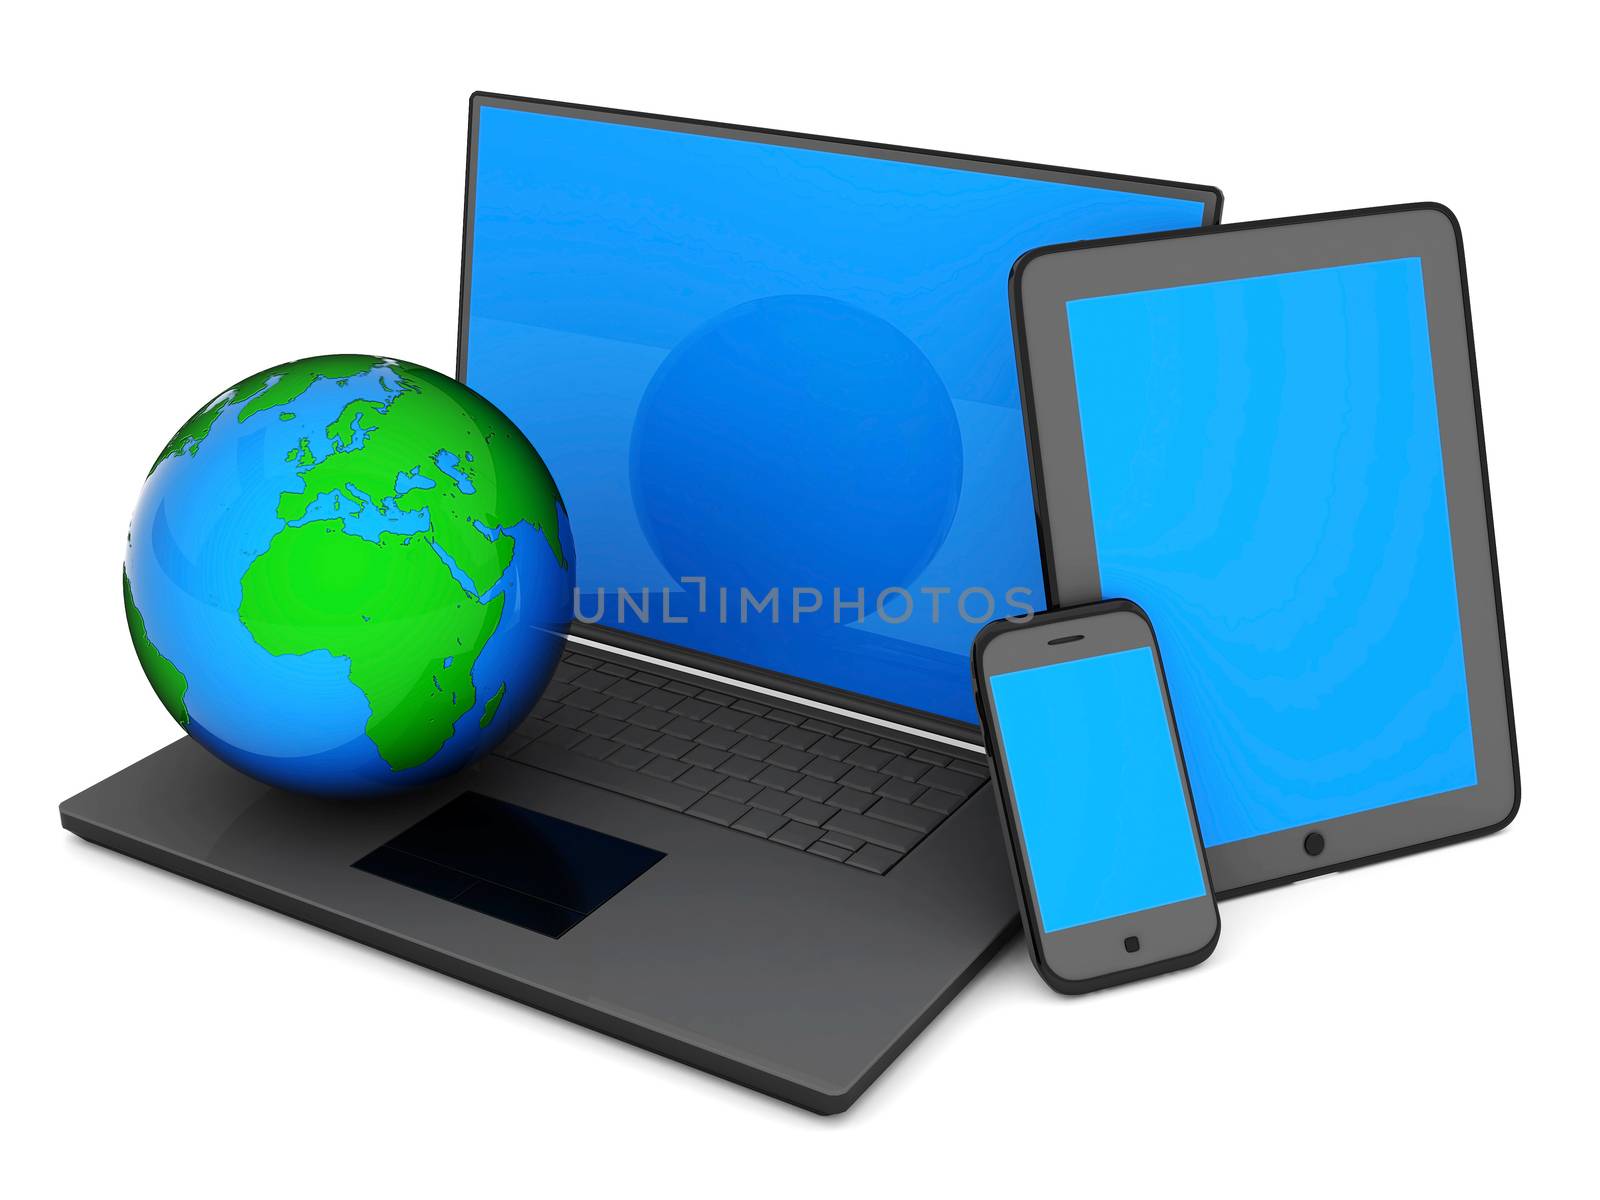 Laptop, Tablet PC and Smartphone on a white background